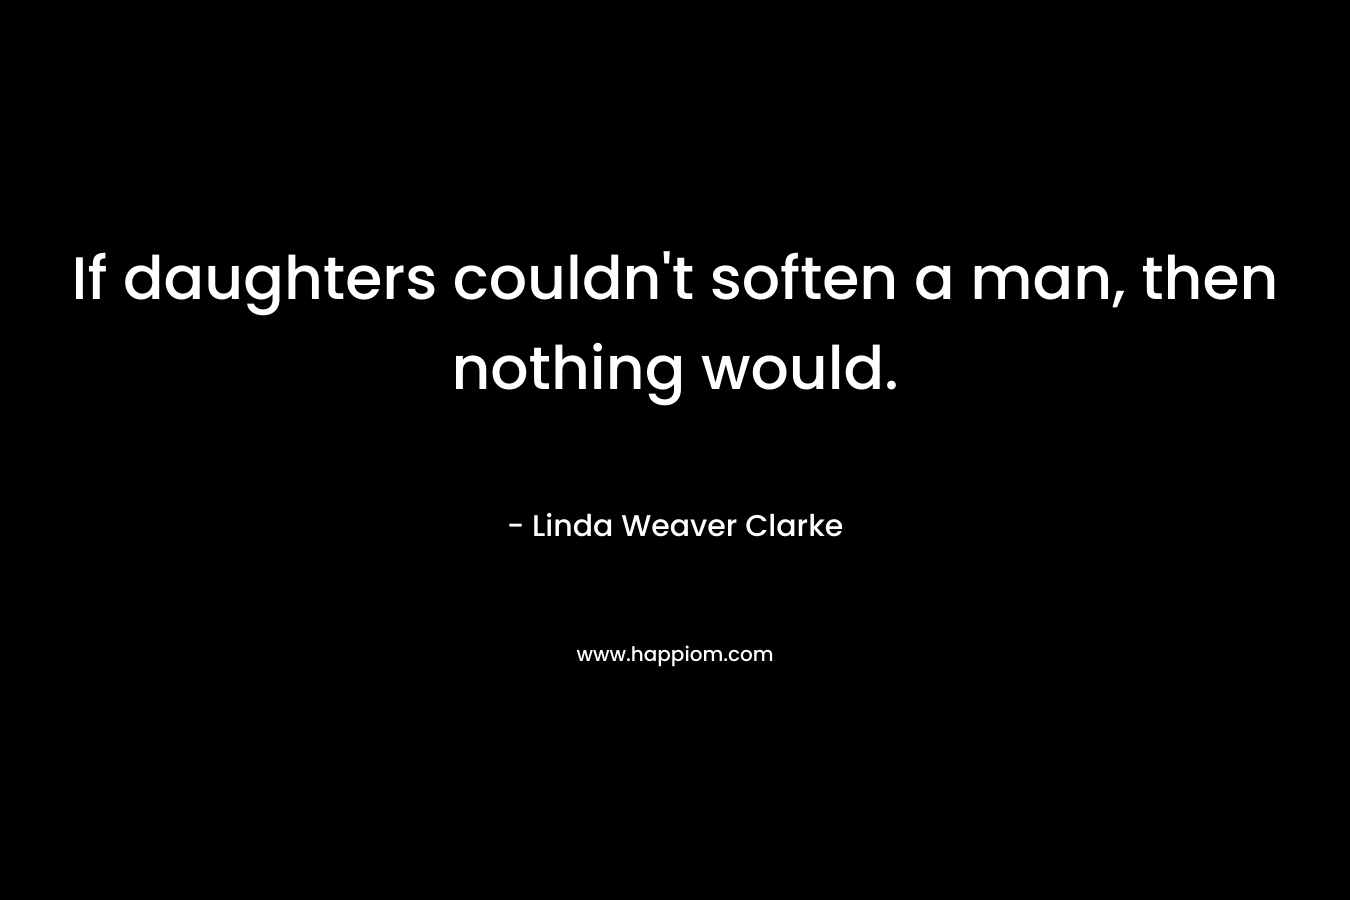 If daughters couldn’t soften a man, then nothing would. – Linda Weaver Clarke